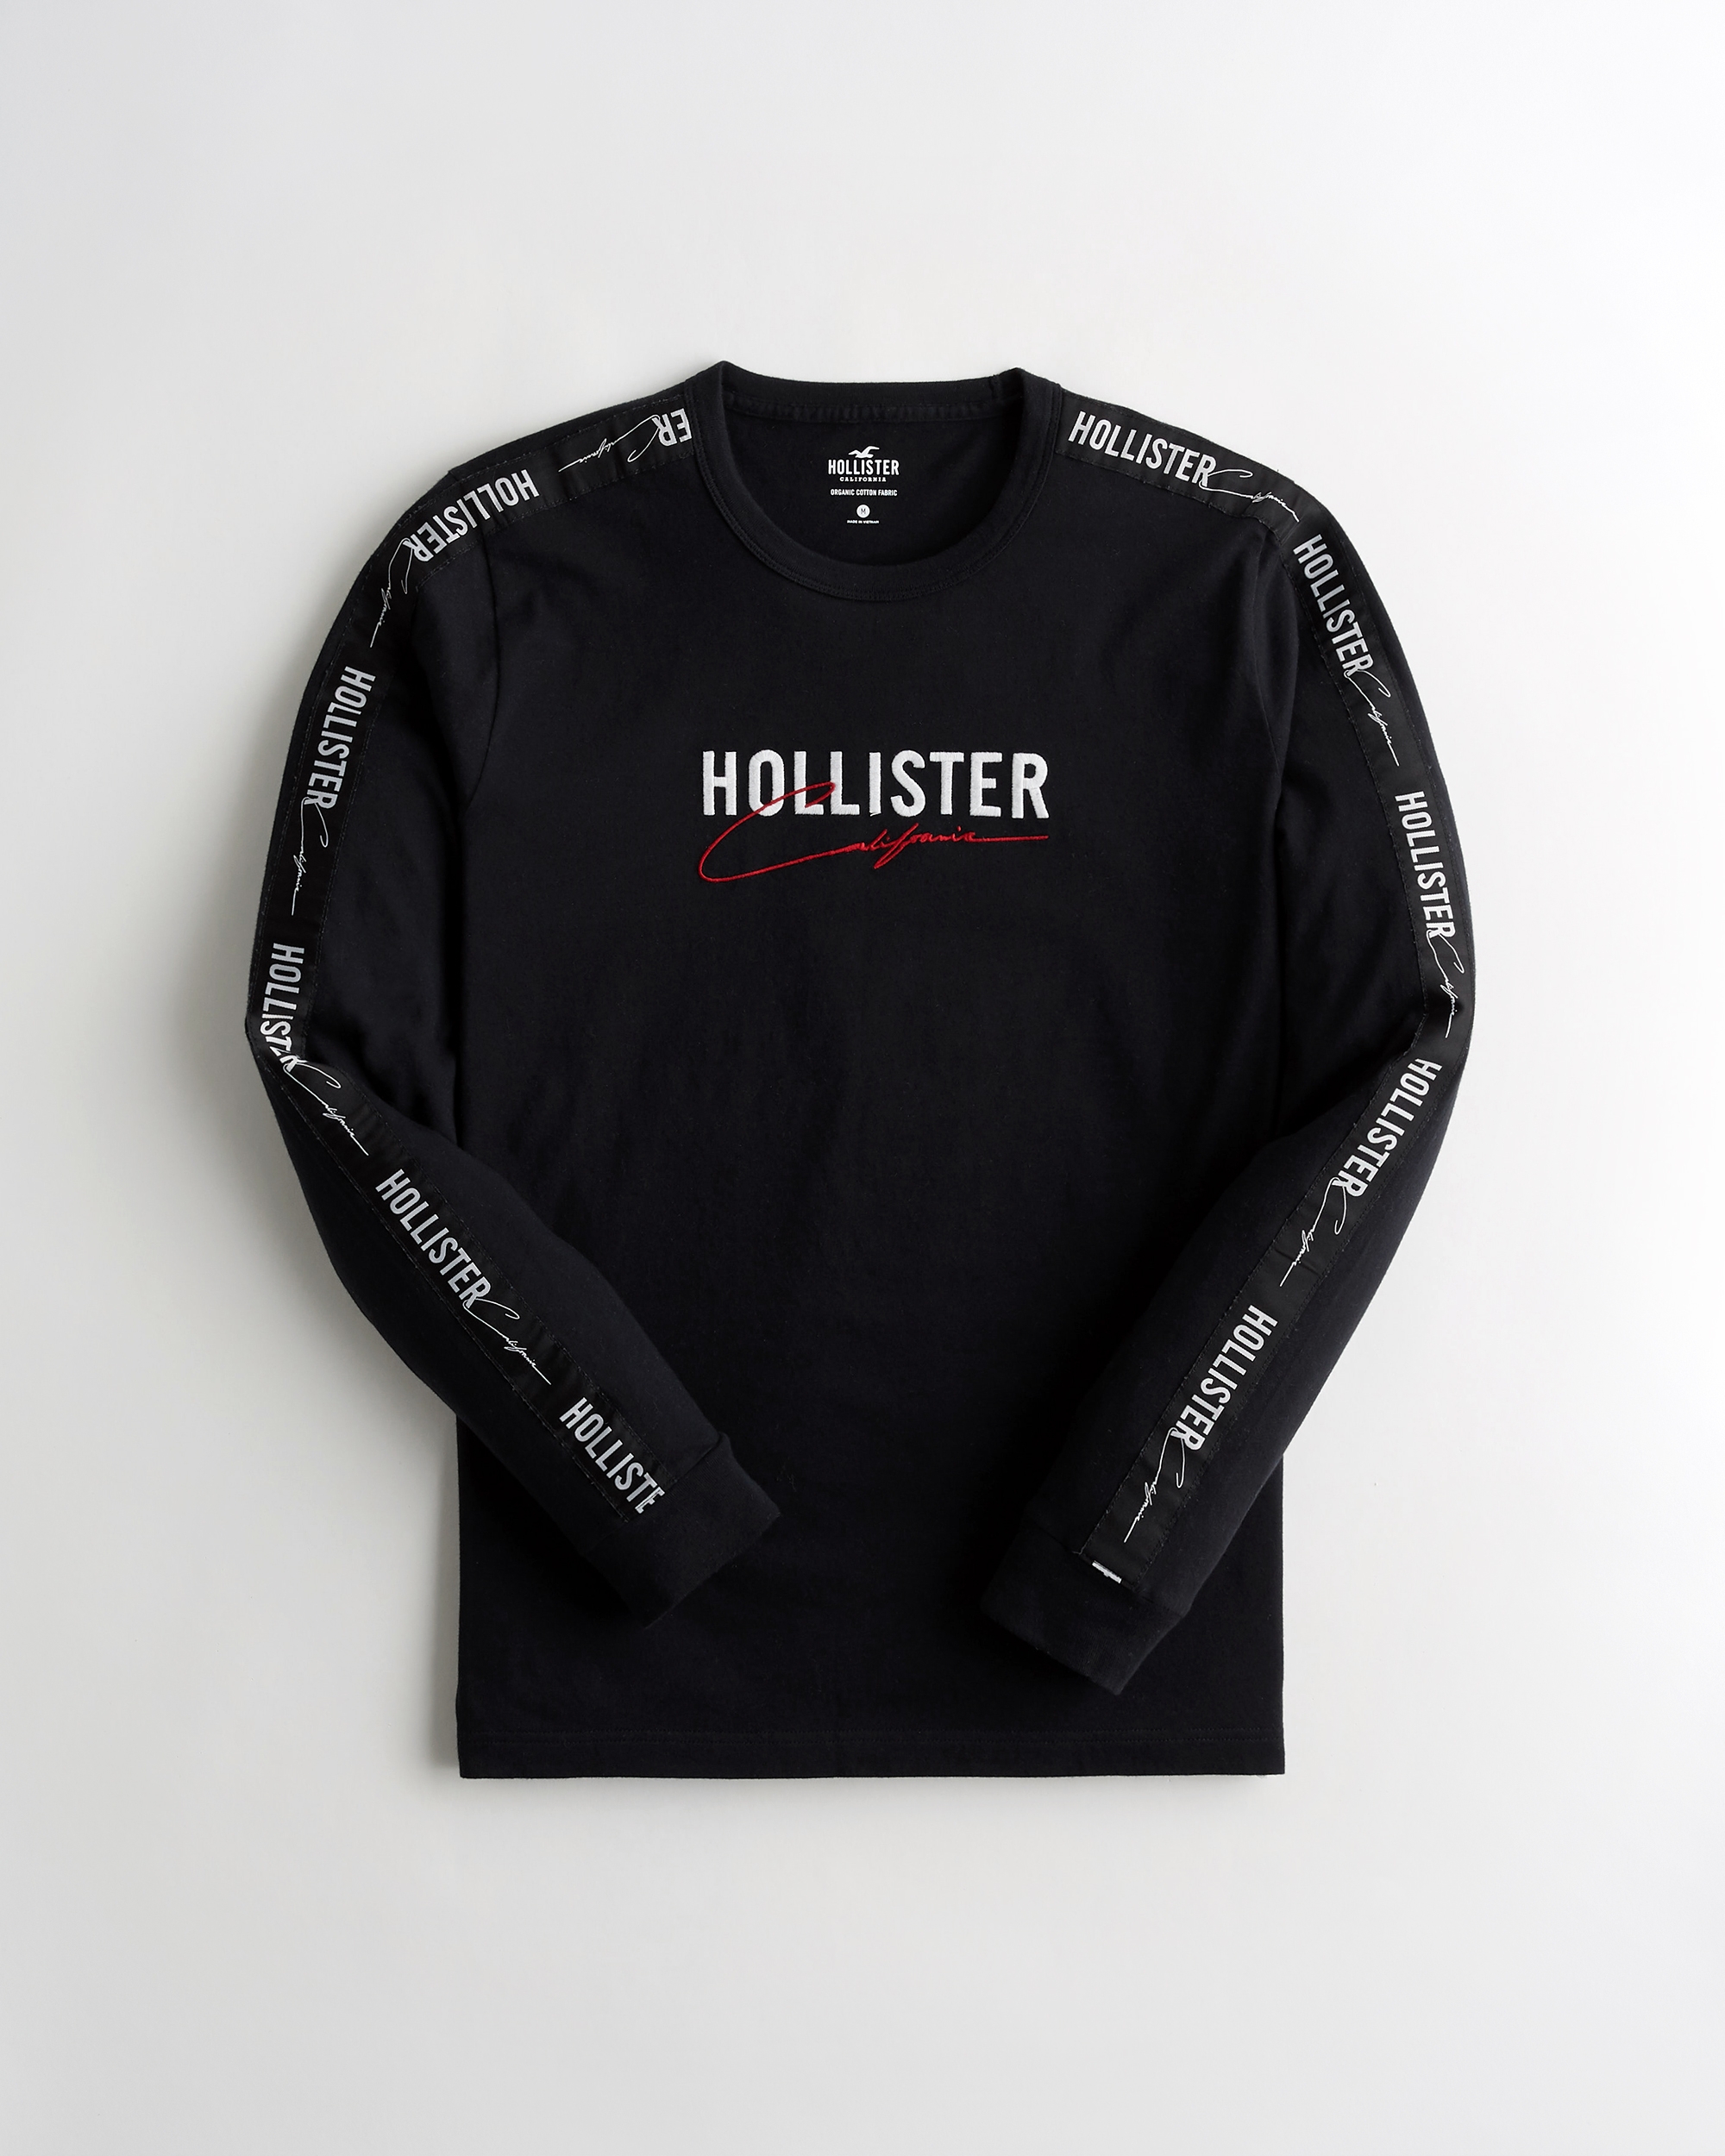 hollister return policy after 60 days